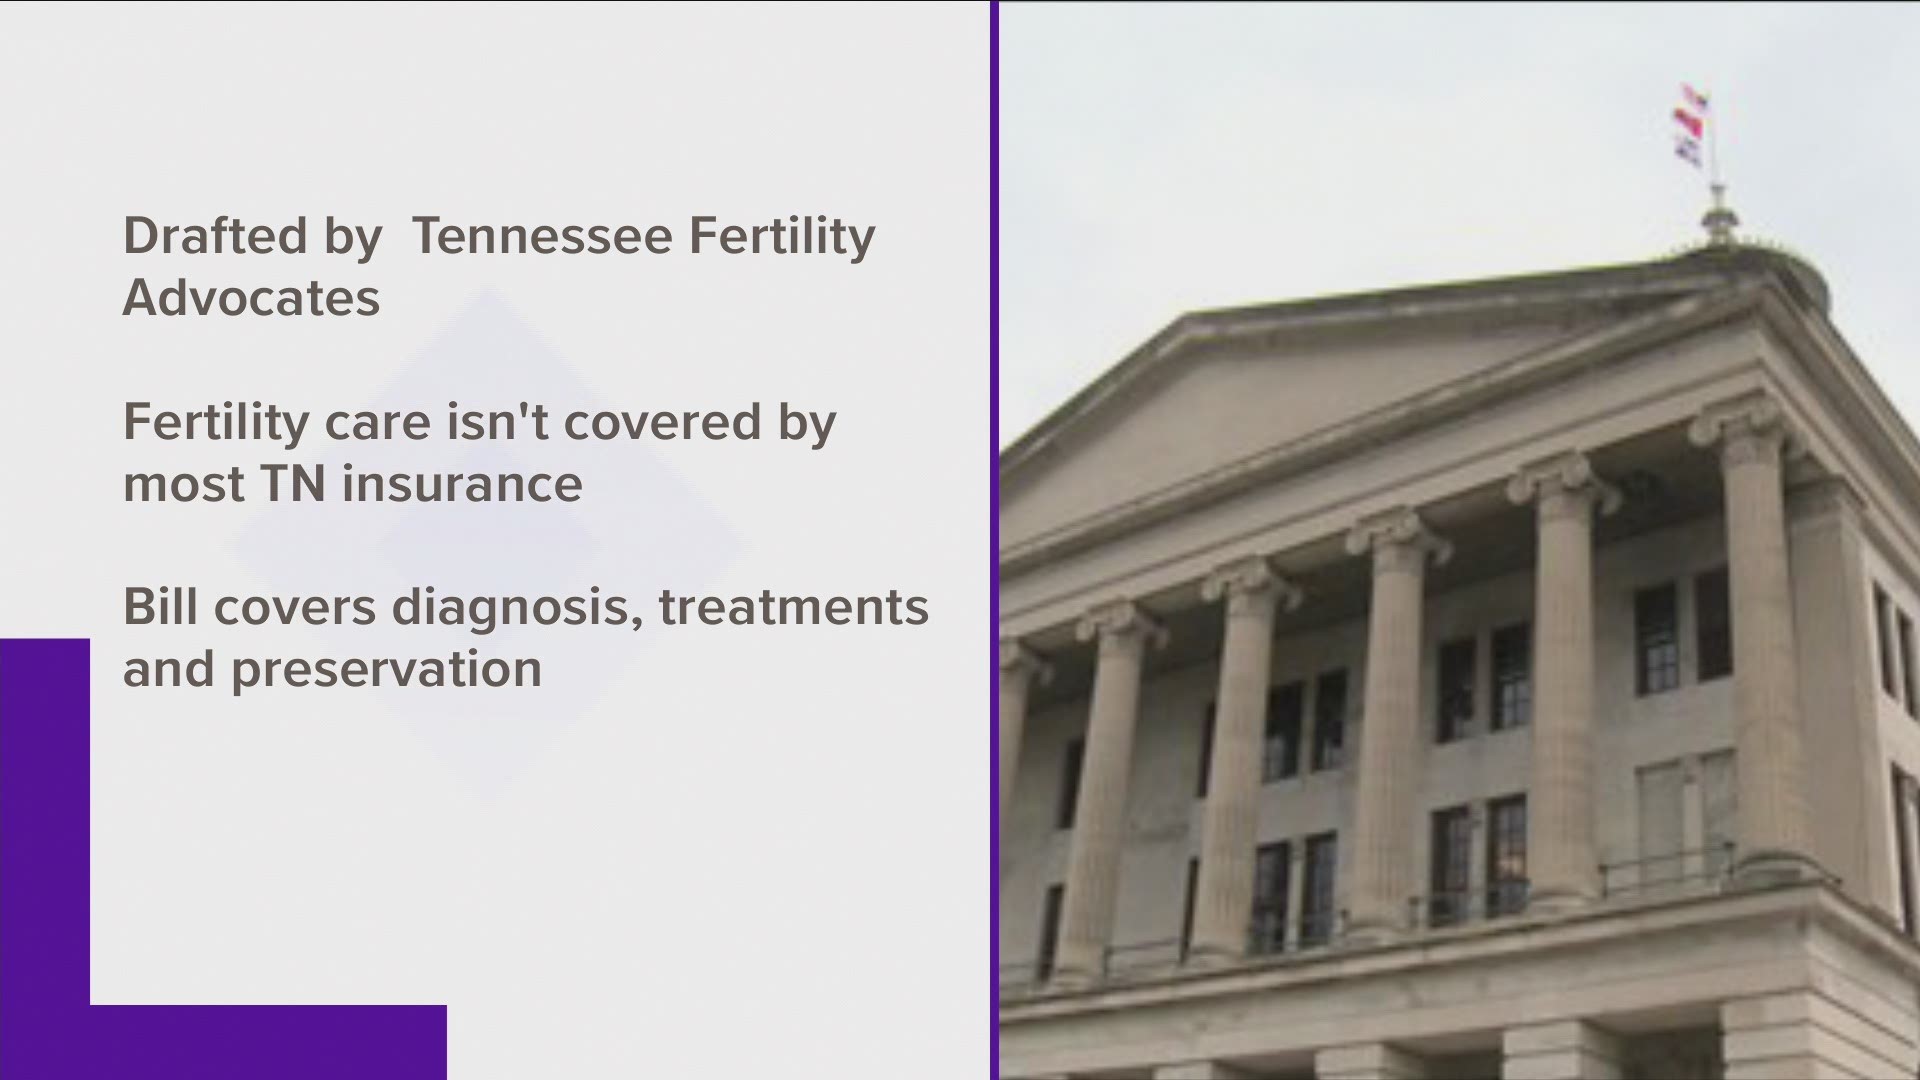 Tennessee lawmakers are considering a bill that would allow for fertility treatments to be covered by insurance.